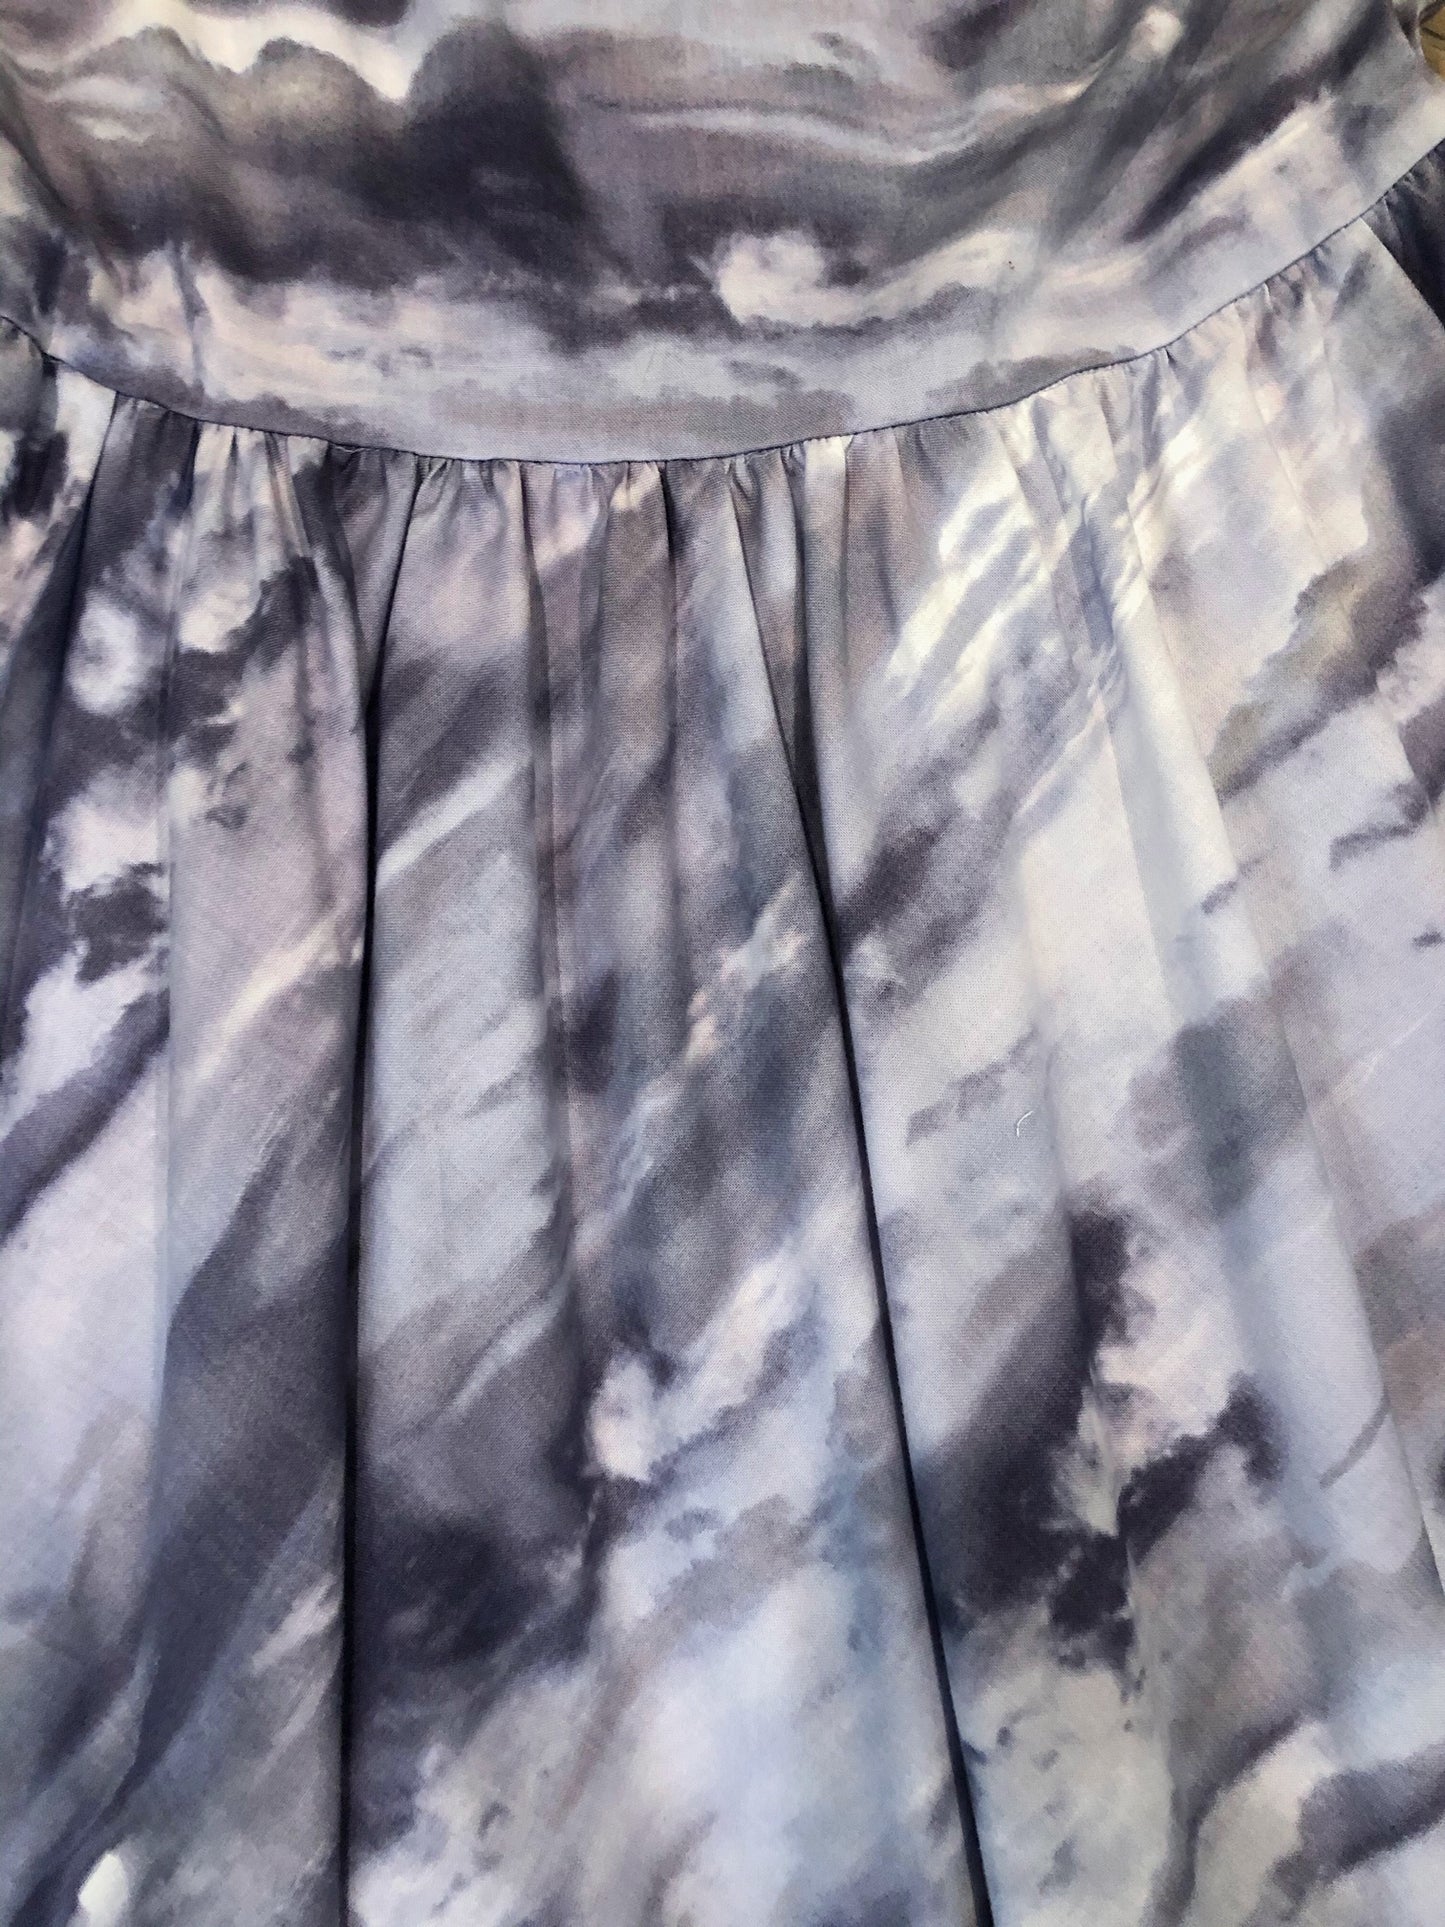 a close up of cloudy skies fabric showing the clouds